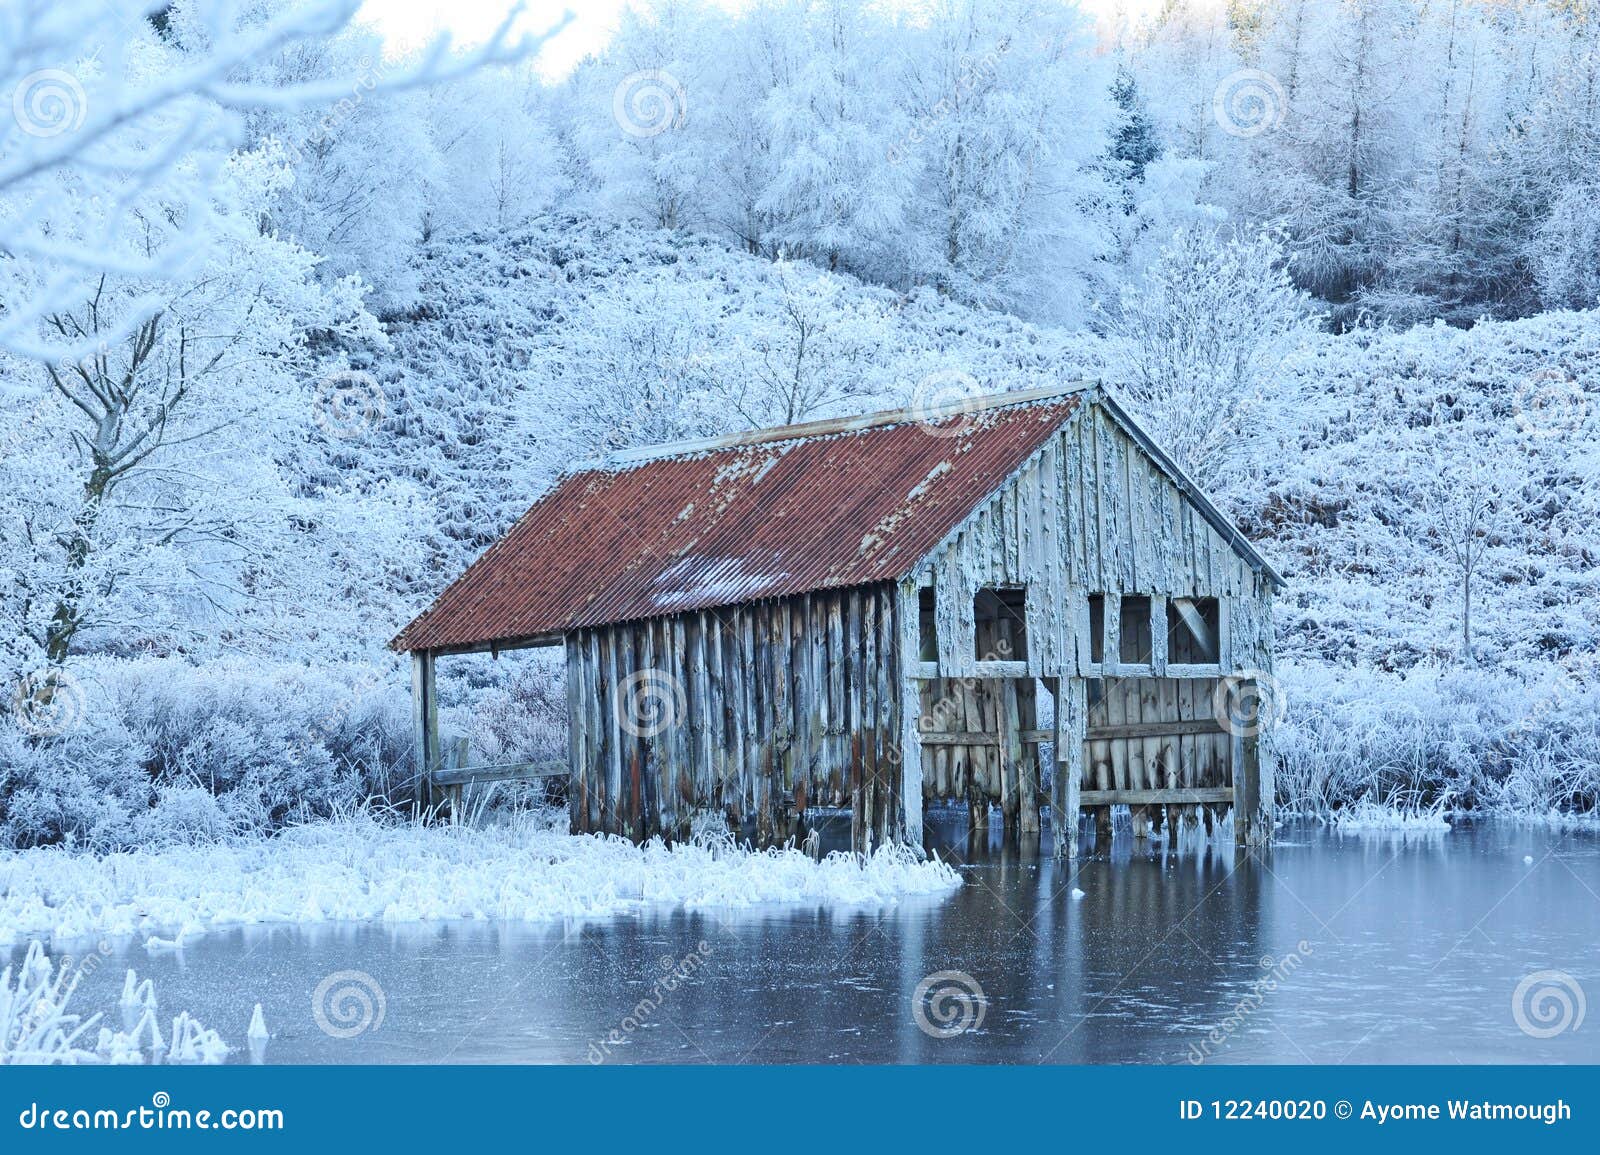 An old decaying boat house on the edge of an ice covered loch with 